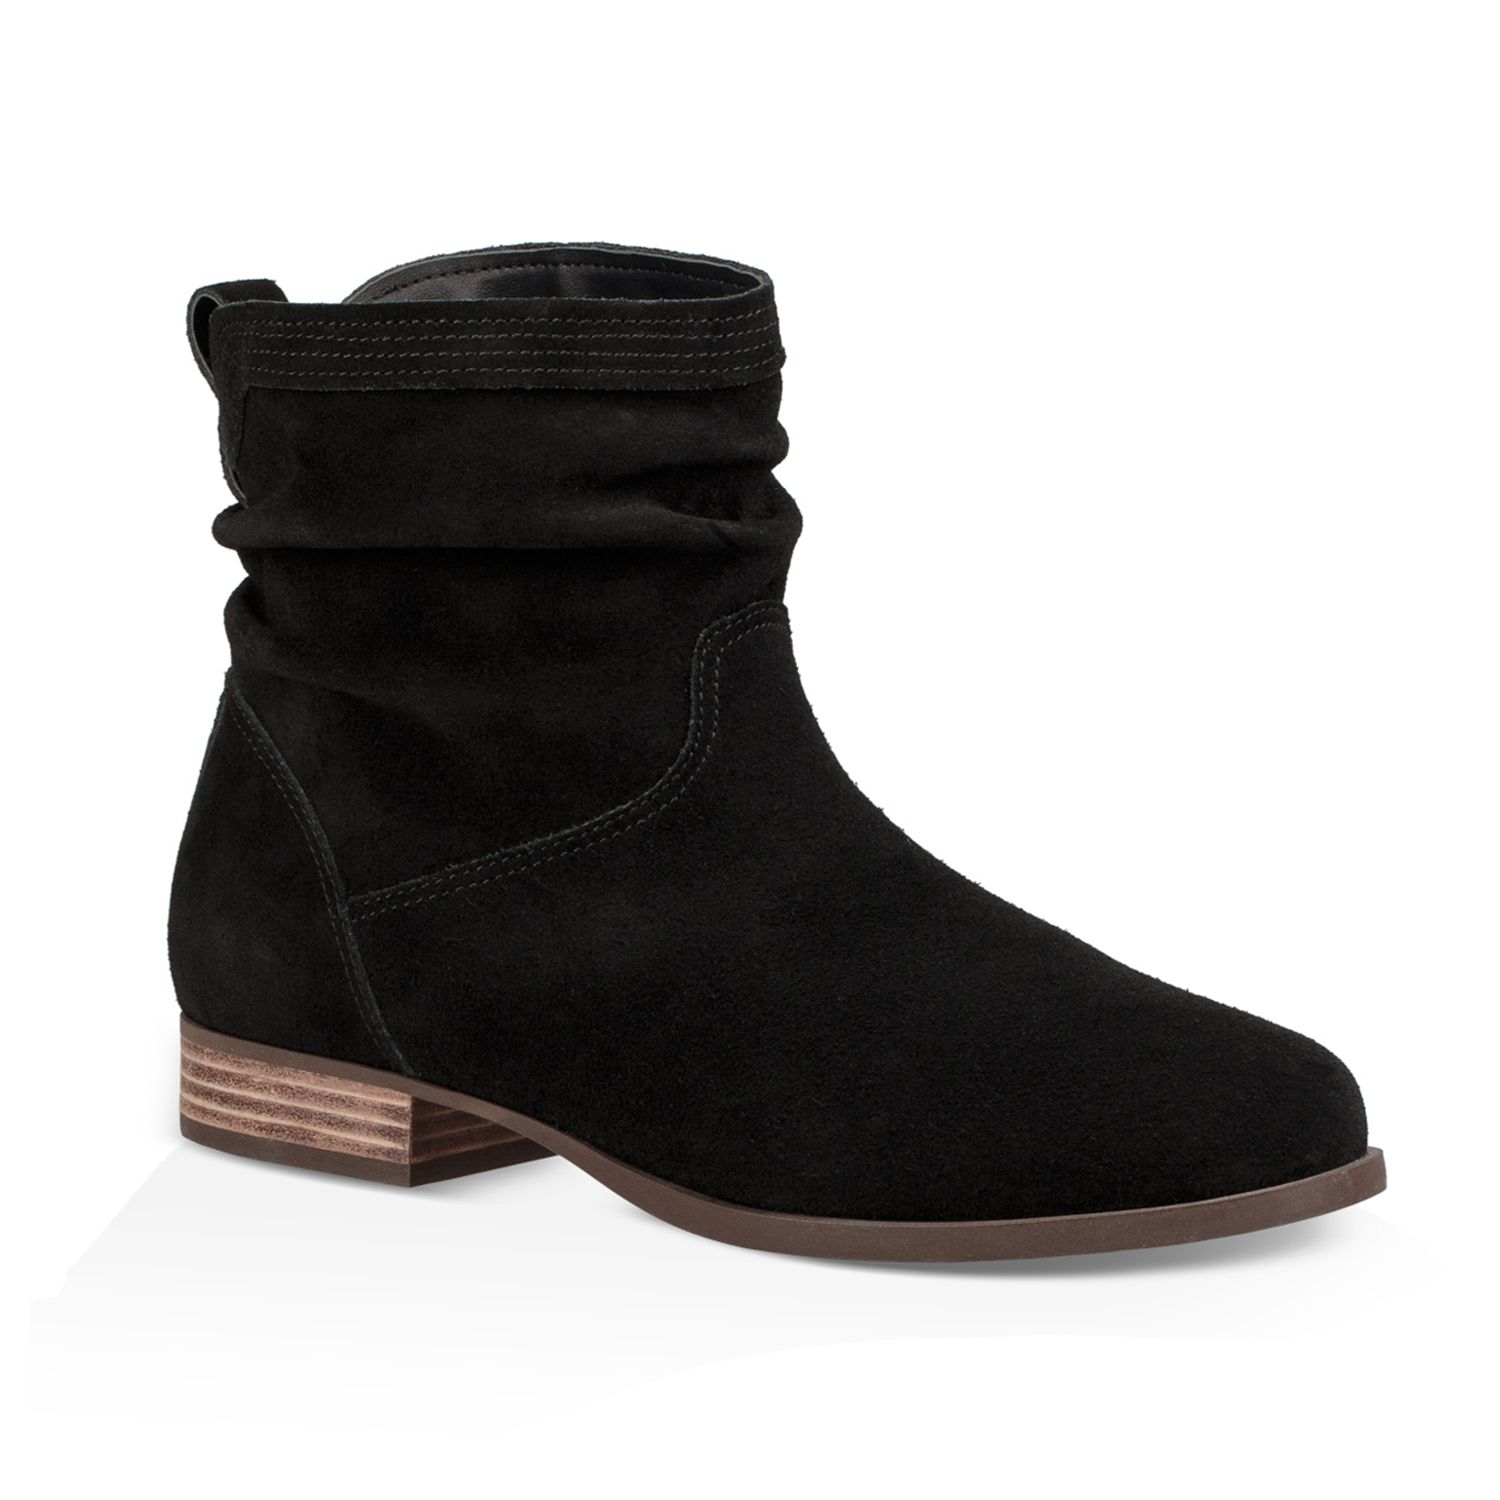 ugg women's ankle boots